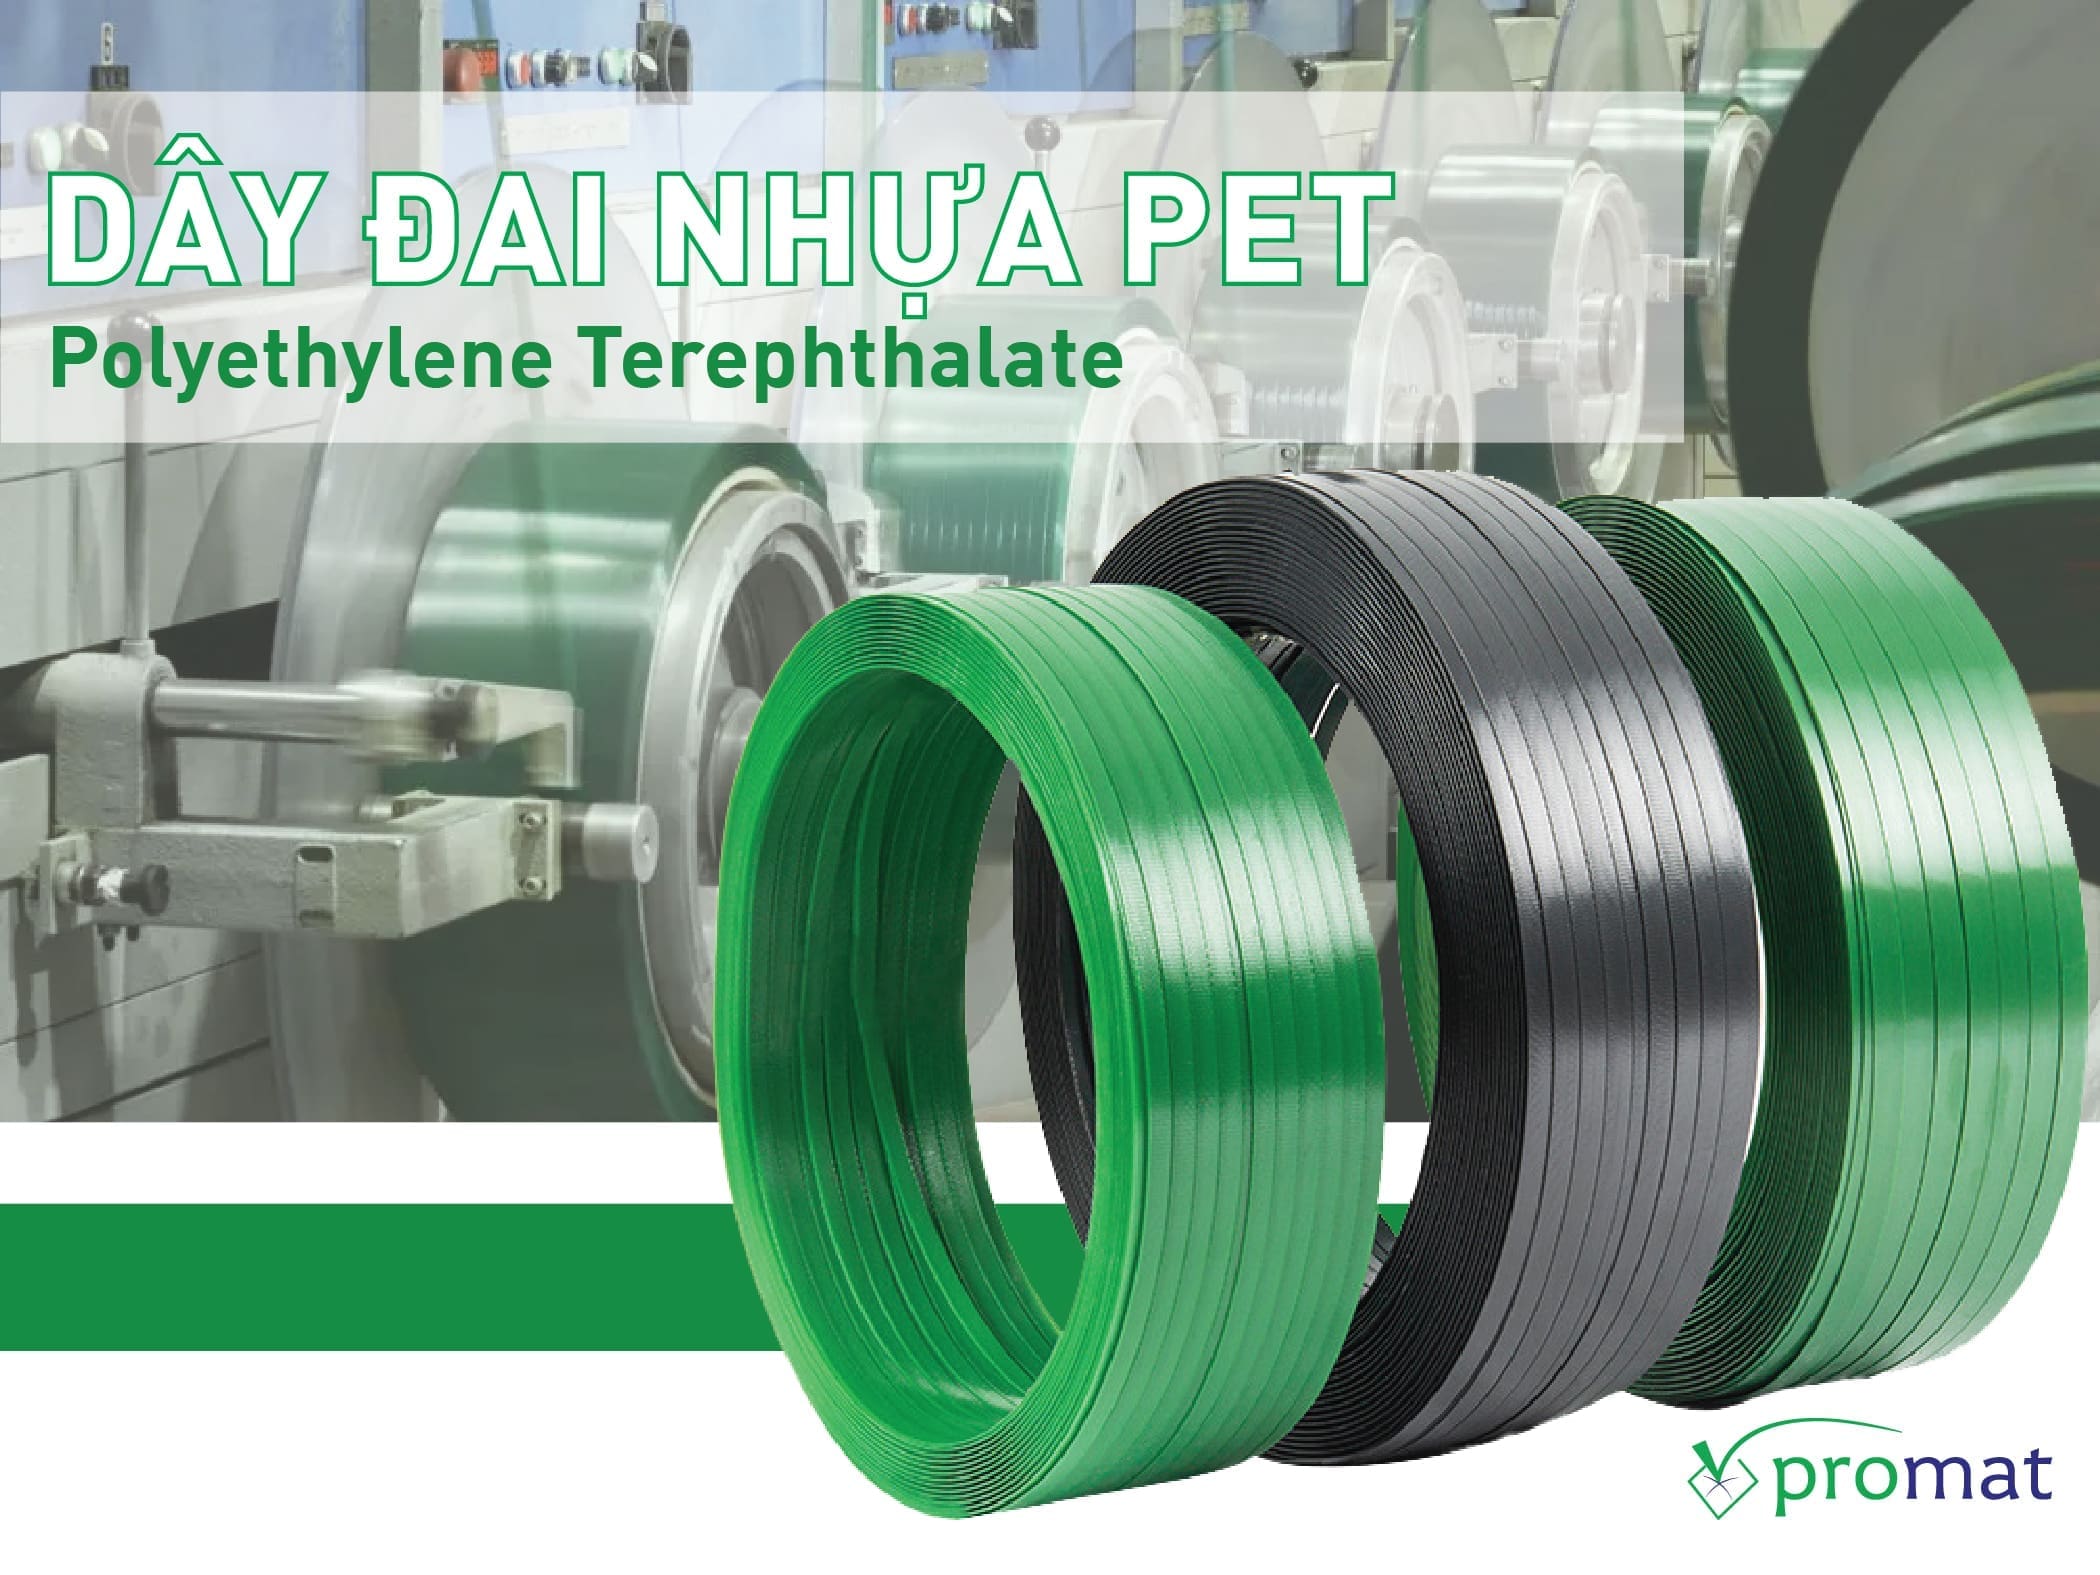 dây đai nhựa pet; dây đai pet; dây đai nhựa pet promat; dây đai composite; dây đai nhựa composite; dây đai composite promat; dây chằng buộc hàng; dây đai chằng buộc hàng; dây chằng buộc hàng promat; dây đai; máy đóng đai; dây đai nhựa pet; dây đai nhựa; dây đai composite; dây đai pet; máy đóng đai cầm tay; dây đai nhựa pp; dây đai pp; máy đóng đai nhựa; dây đai buộc hàng; dụng cụ siết dây đai nhựa; máy đóng dây đai nhựa; dây nhựa buộc hàng; bọ nhựa siết dây đai; máy đóng đai nhựa hàn nhiệt; dây đai hàng; máy buộc dây đai nhựa; dây đai dẹt; máy đóng dây đai; máy đóng đai nhựa cầm tay; dây đai đóng hàng; máy siết dây đai nhựa; dụng cụ siết dây đai; đai nhựa; dây buộc hàng xe máy; máy hàn dây đai nhựa cầm tay; dụng cụ đóng đai nhựa cầm tay; dụng cụ đóng đai; dụng cụ siết dây đai thép; dây đai siết hàng; dây đai nhựa pp tphcm; dây đai pet xanh; dây đai nhựa đóng thùng; máy sản xuất dây đai nhựa; giá dây đai nhựa; máy đóng đai thép cầm tay; máy đóng đai nhựa dùng pin; máy đóng đai kiện hàng; dây đai nhựa pp 12mm; giá dây đai nhựa pp; promat vietnam; promat.com.vn; promat; professional material supplier; công ty promat;